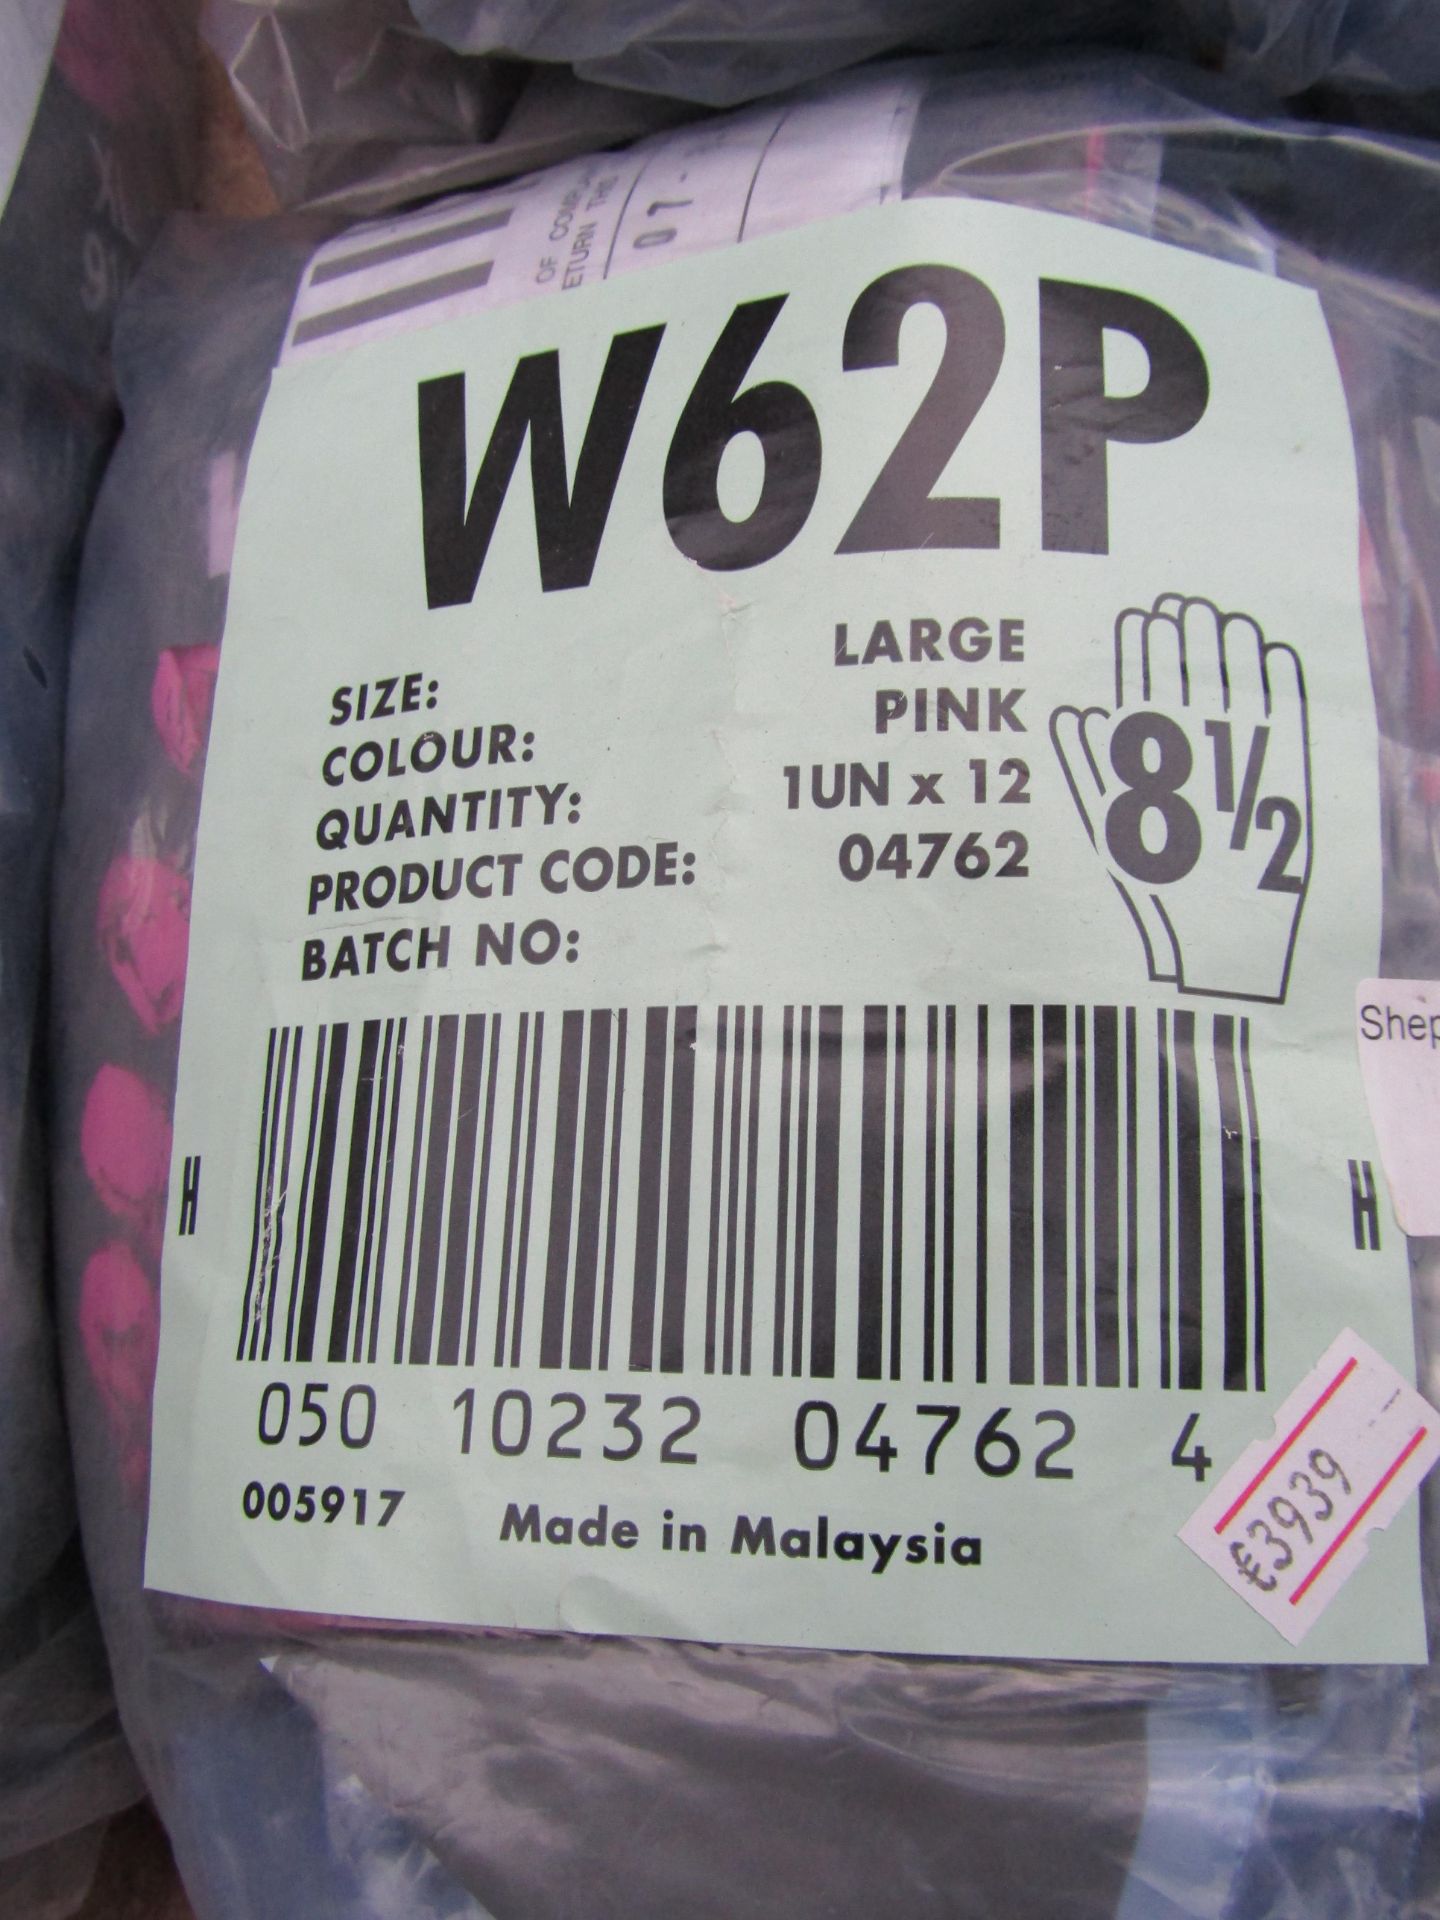 12x W26P large pink viynl gloves, size 8 1/2, new and packaged.